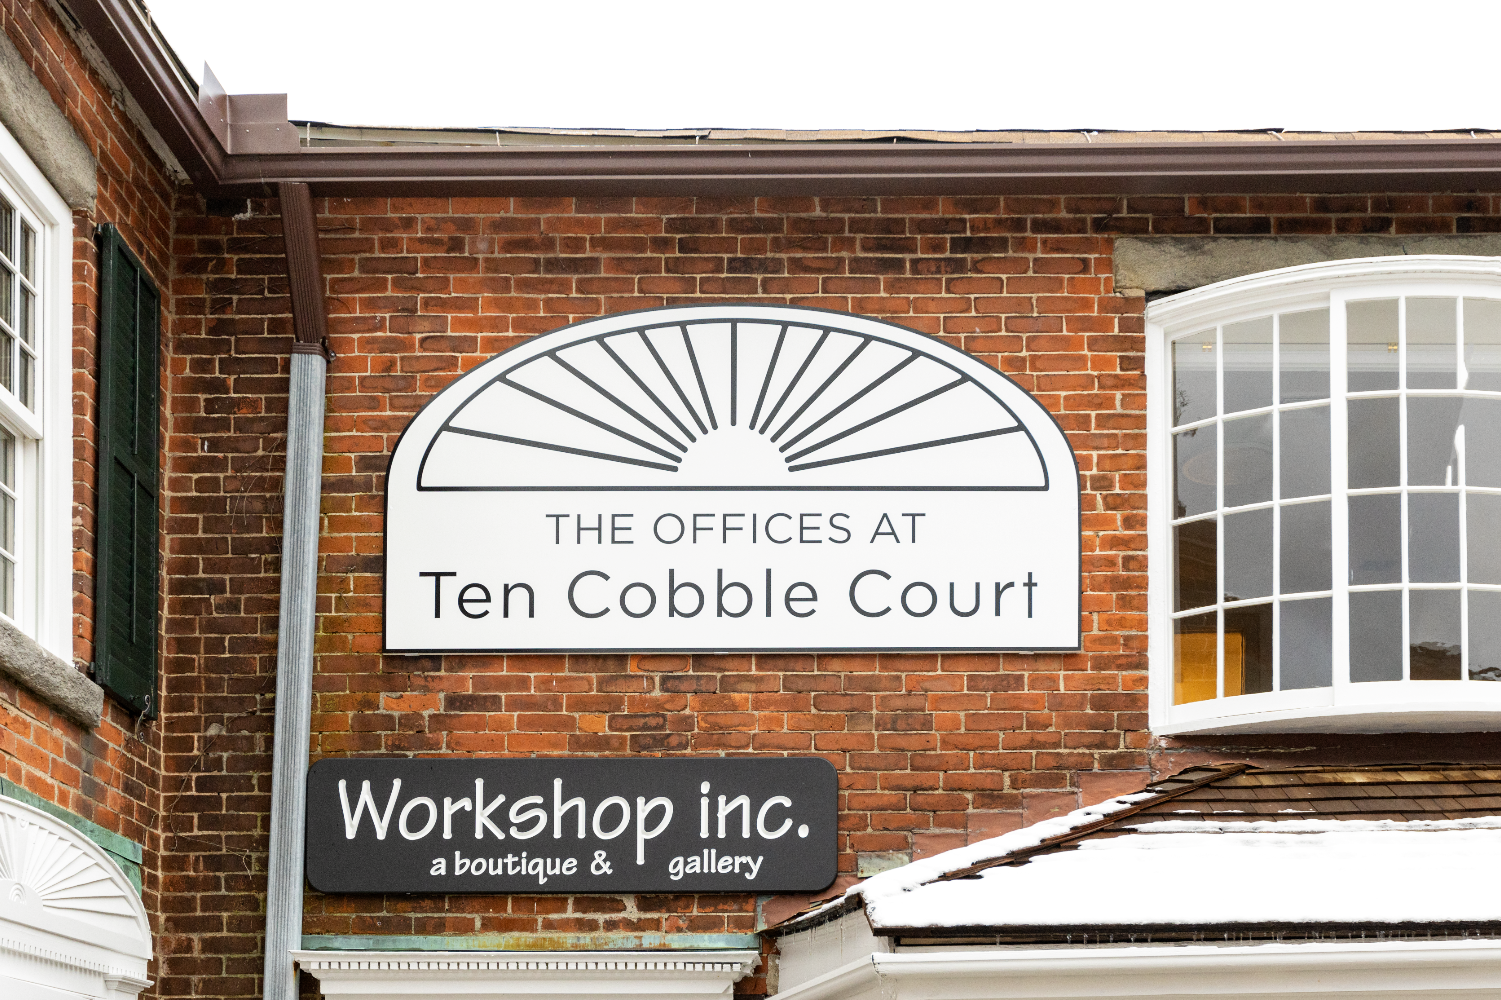 Sign for The Offices at Ten Cobble Court and The Workshop.